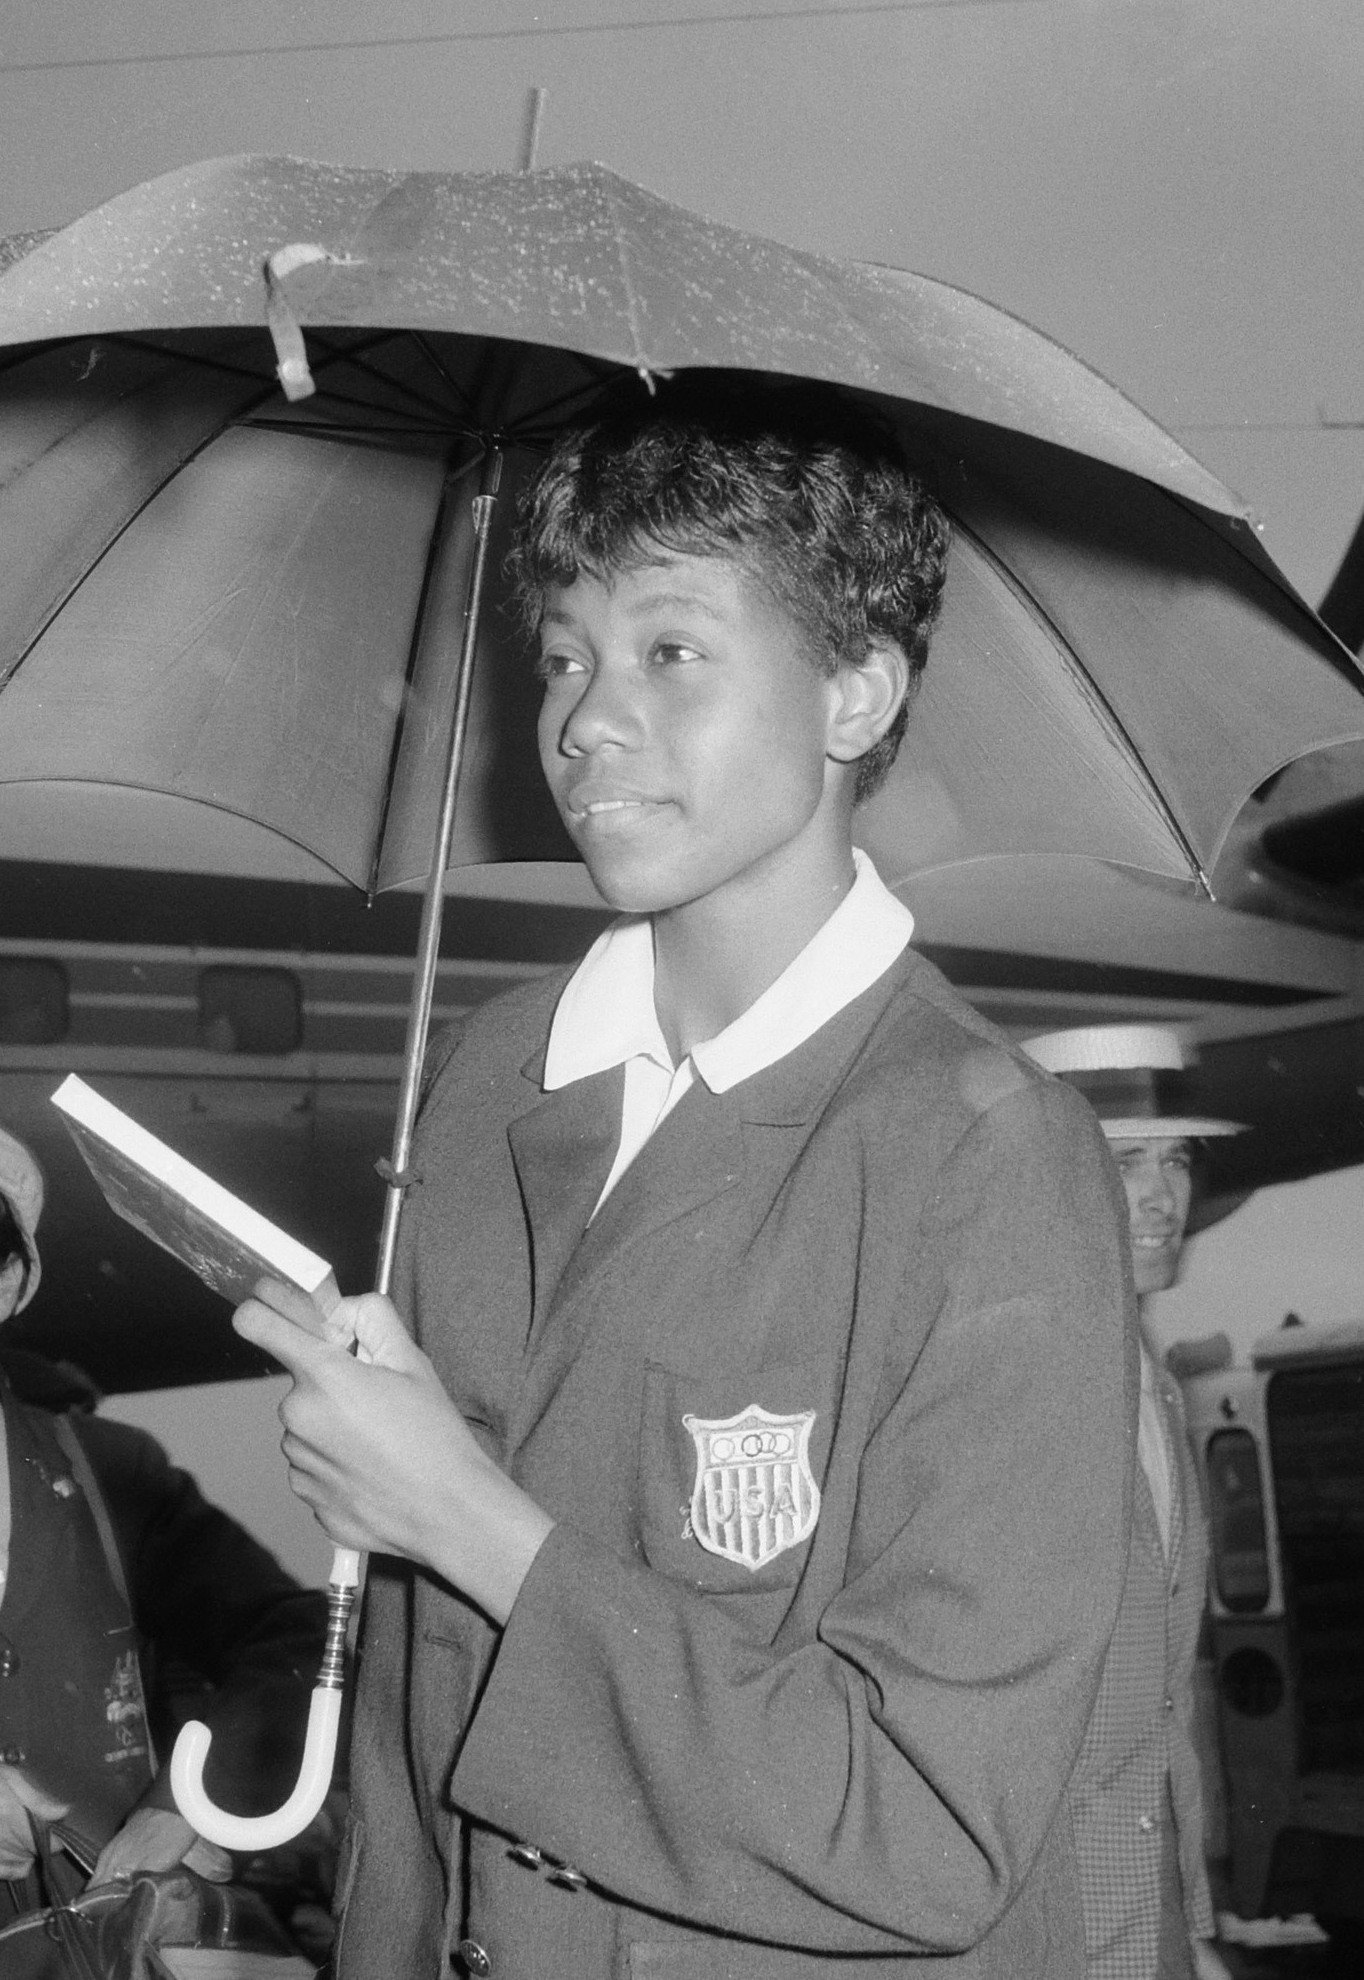 Wilma Rudolph poses under umbrella for the photographers in Netherlands in September 1960 | Photo: Wikimedia Commons Images, 2.24.01.03 Bestanddeelnummer 911-6074, CC BY-SA 3.0 nl